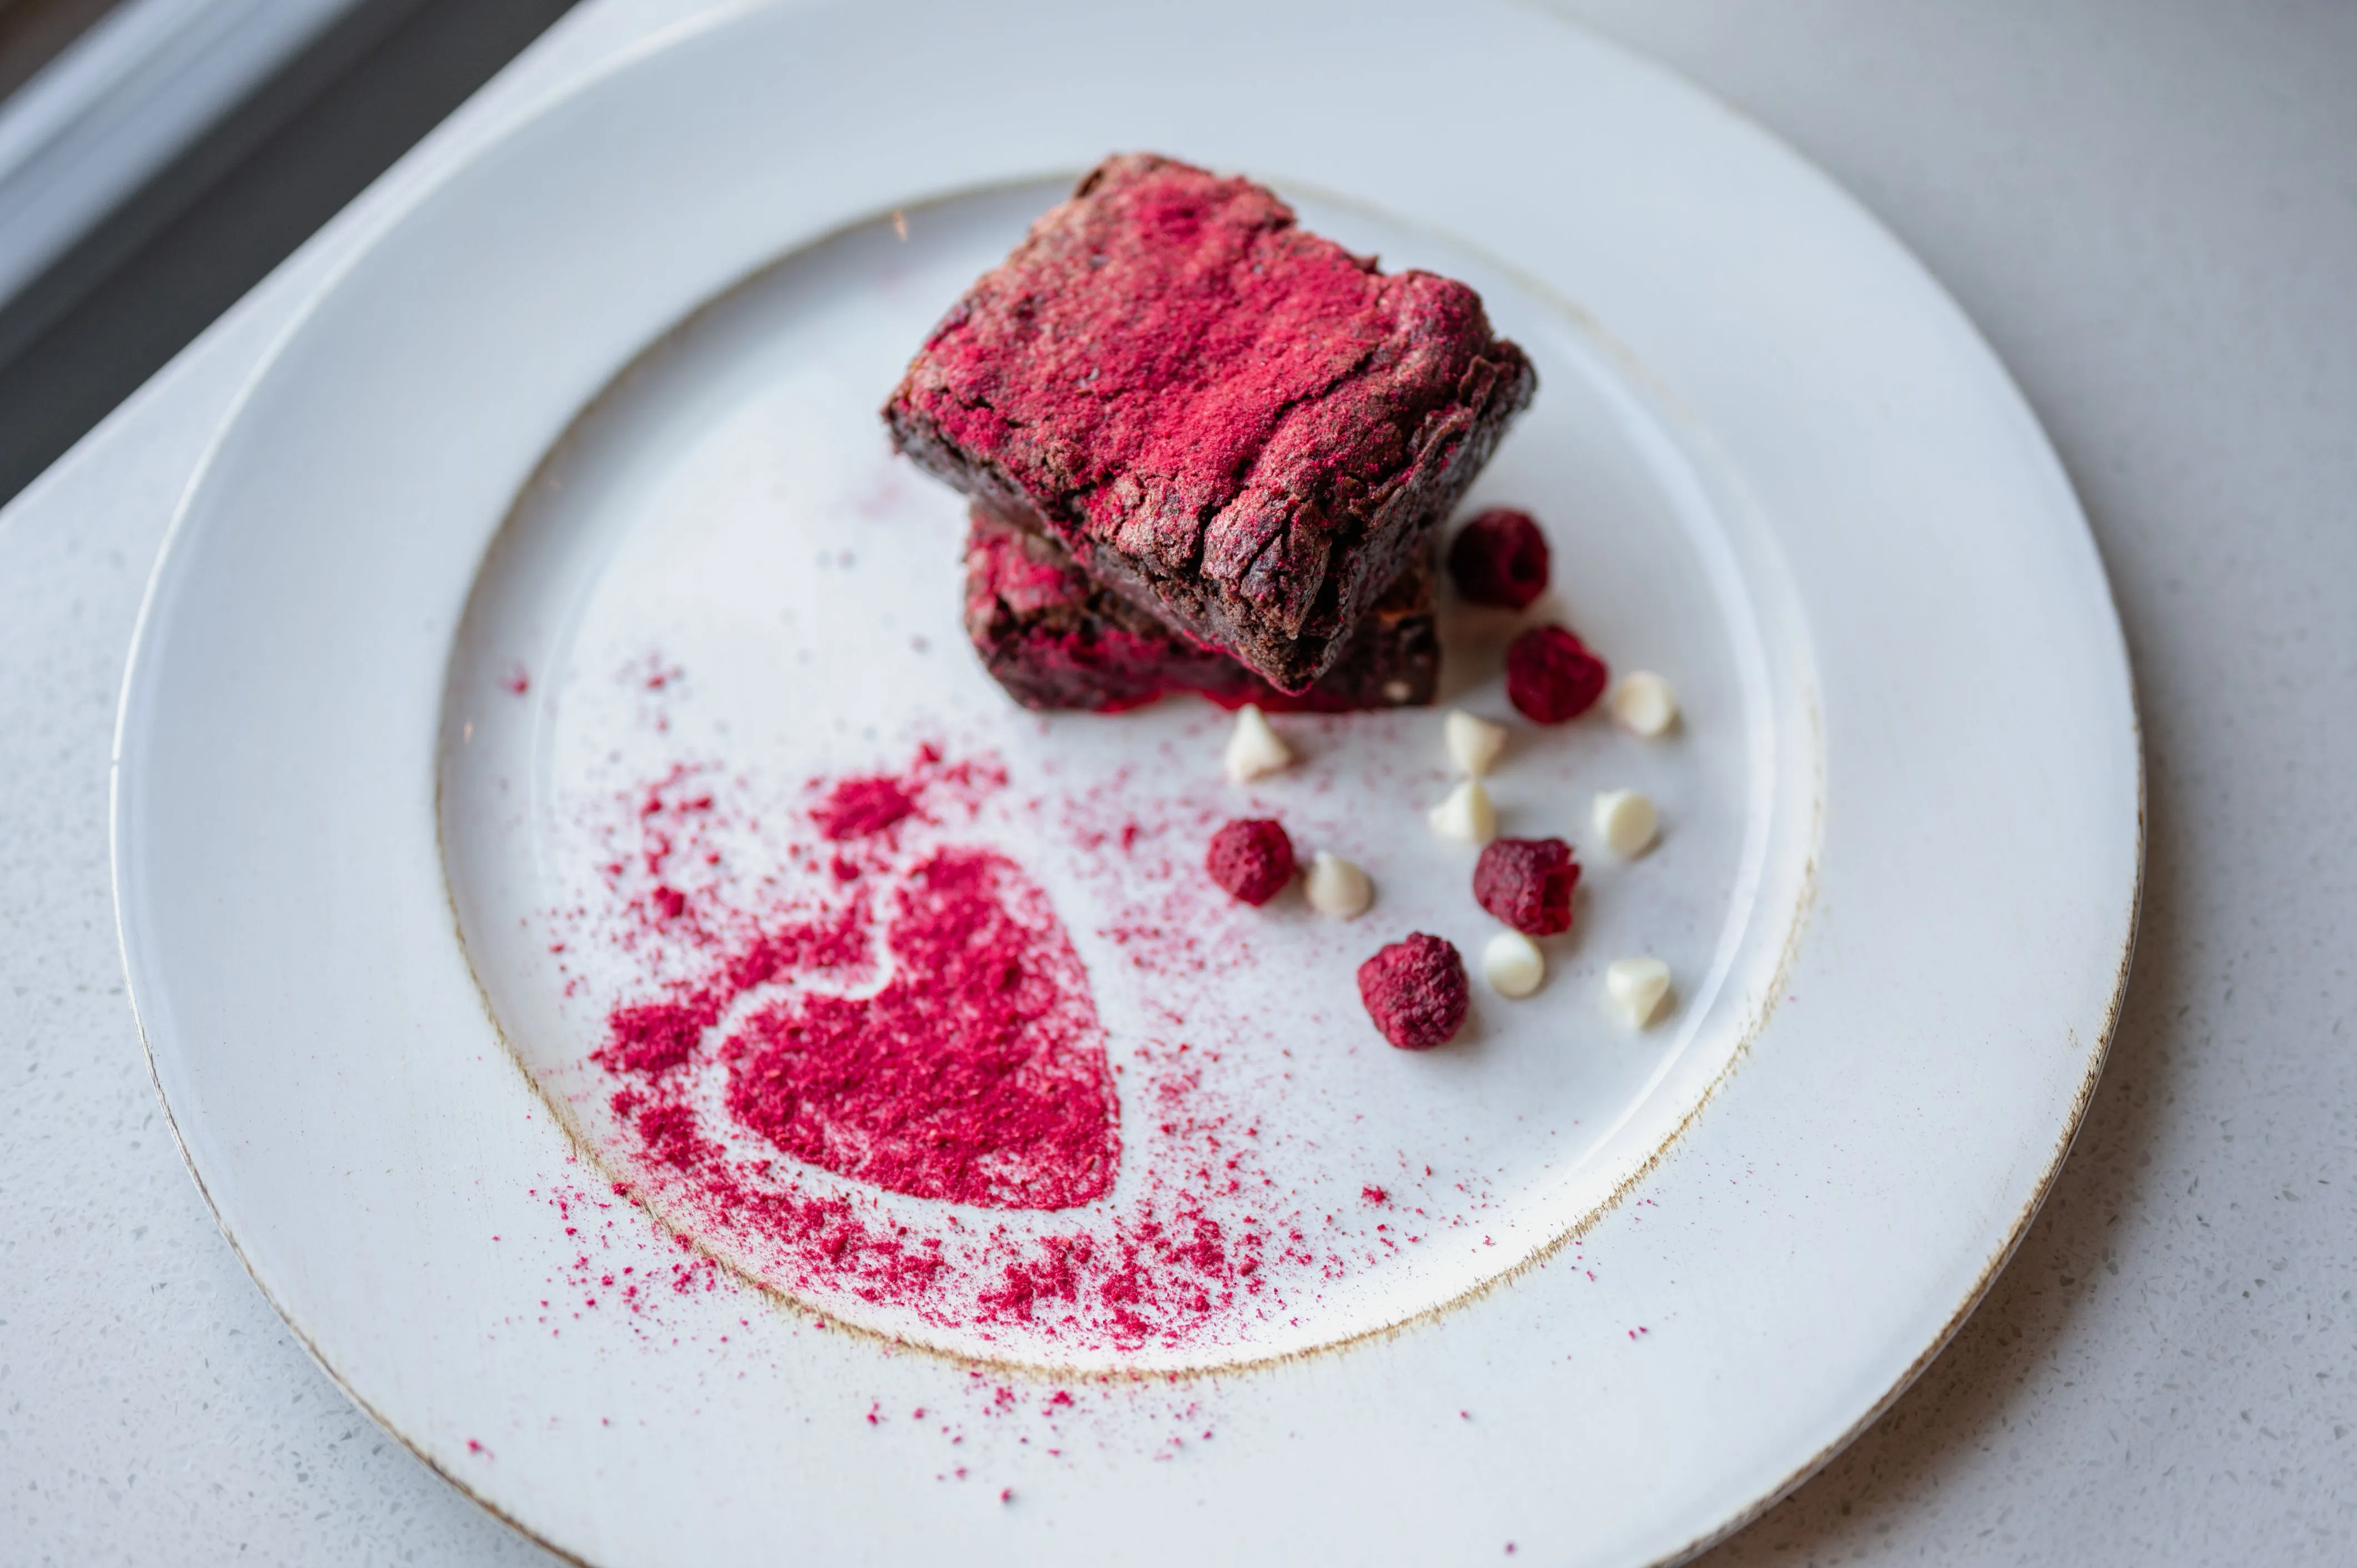 Gourmet brownie dusted with red powder on a white plate, adorned with a decorative powdered sugar heart and scattered raspberries and white chocolate drops.